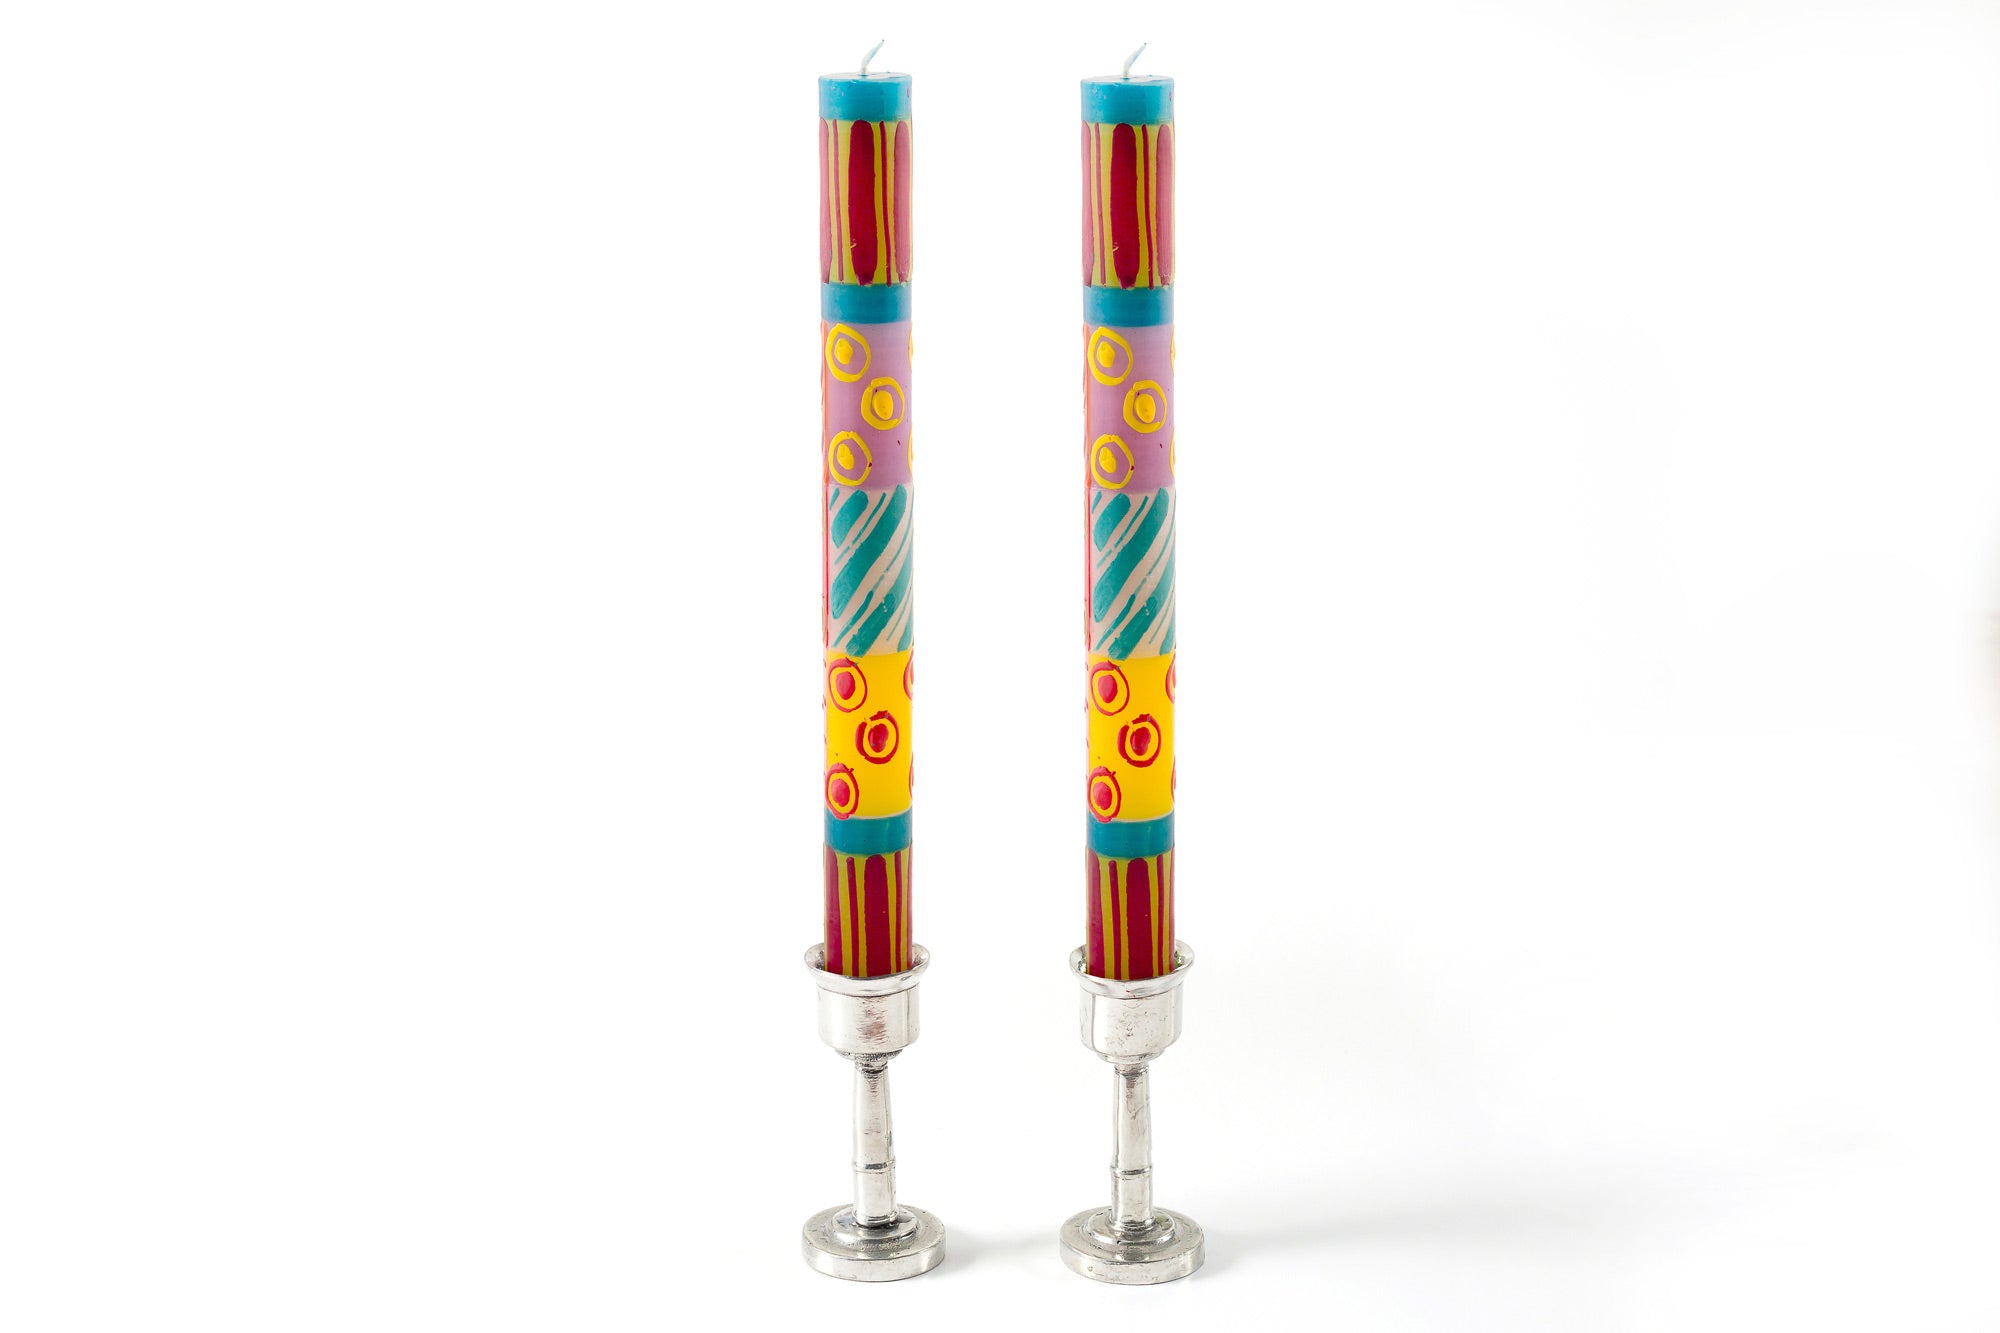 Matched taper pair of Carousel candles in pewter taper holders. Dots & stripes in pinks, yellow, turquoise, and greens!